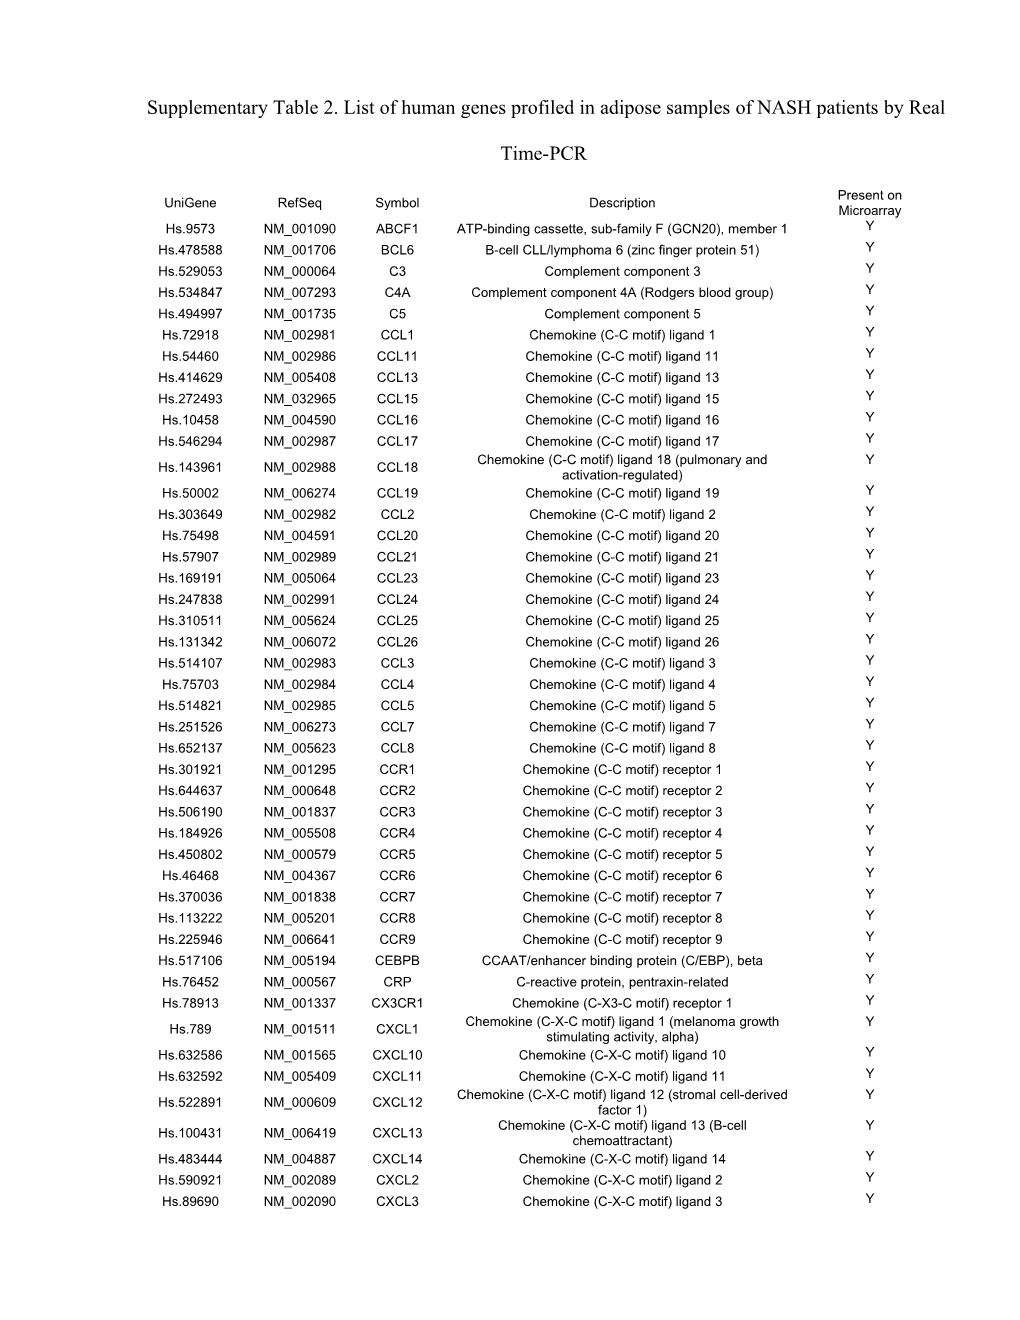 Supplementary Table 2.List of Human Genes Profiled in Adipose Samples of NASH Patients